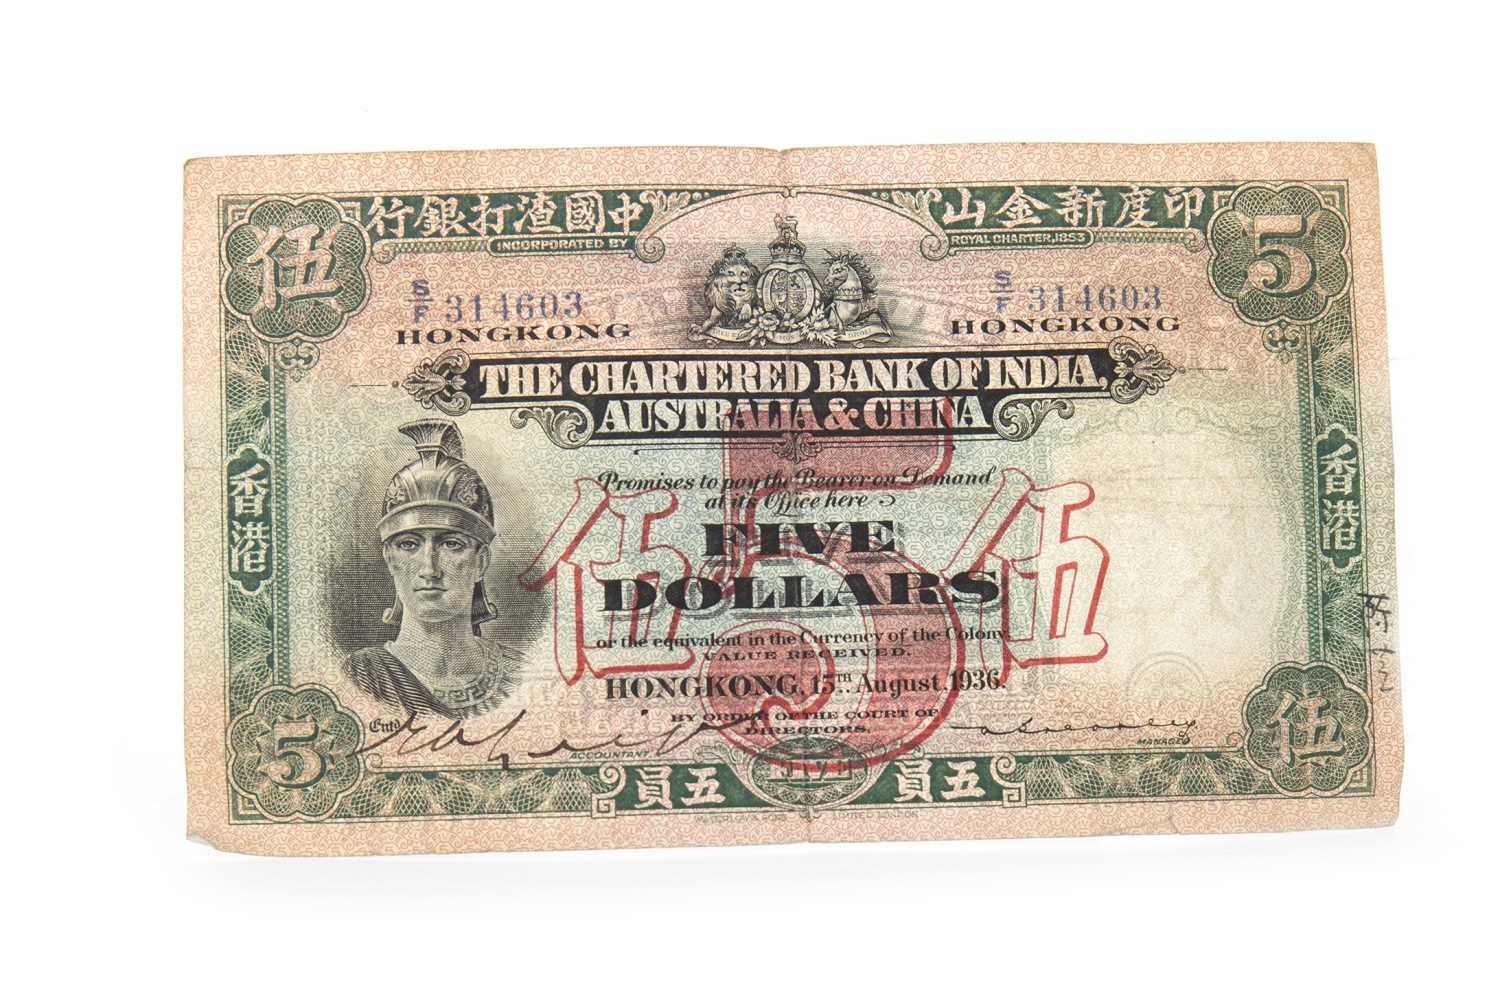 Lot 38 - A THE CHARTERED BANK OF INDIA, AUSTRALIA & CHINA £5 NOTE